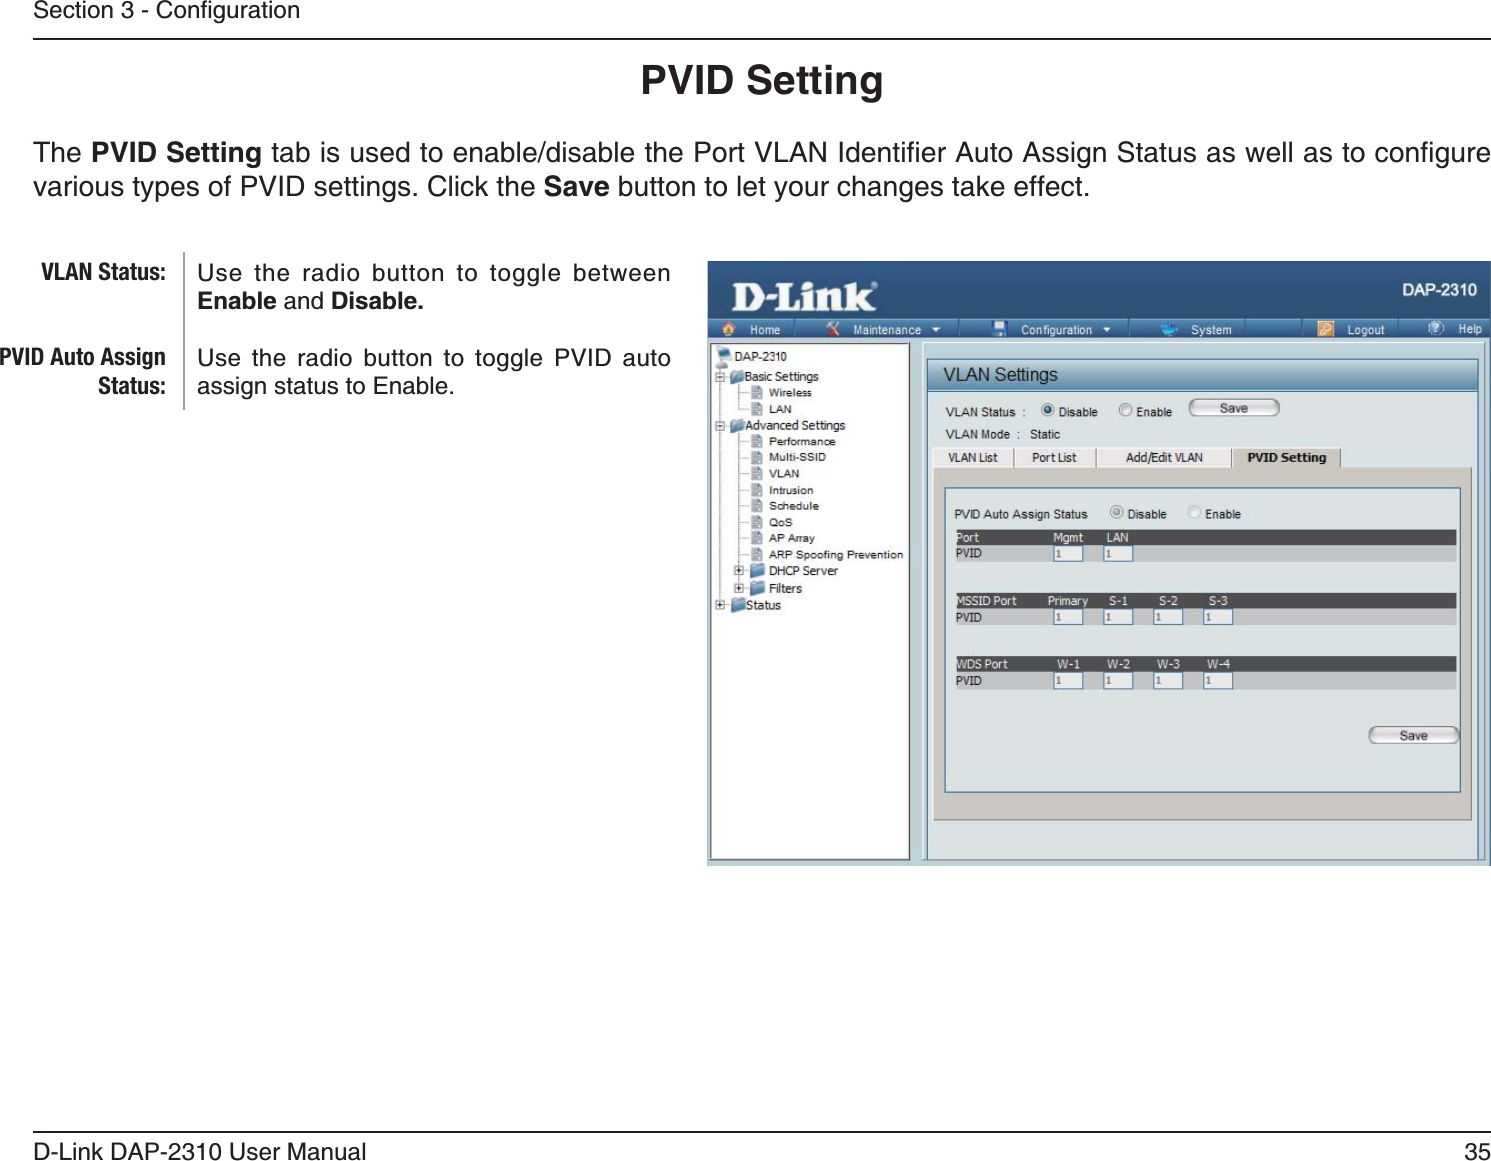 35D-Link DAP-2310 User ManualPVID SettingThe PVID Settingvarious types of PVID settings. Click the Save button to let your changes take effect.Use the radio button to toggle between Enable and Disable. Use the radio button to toggle PVID auto assign status to Enable.VLAN Status:PVID Auto Assign Status: